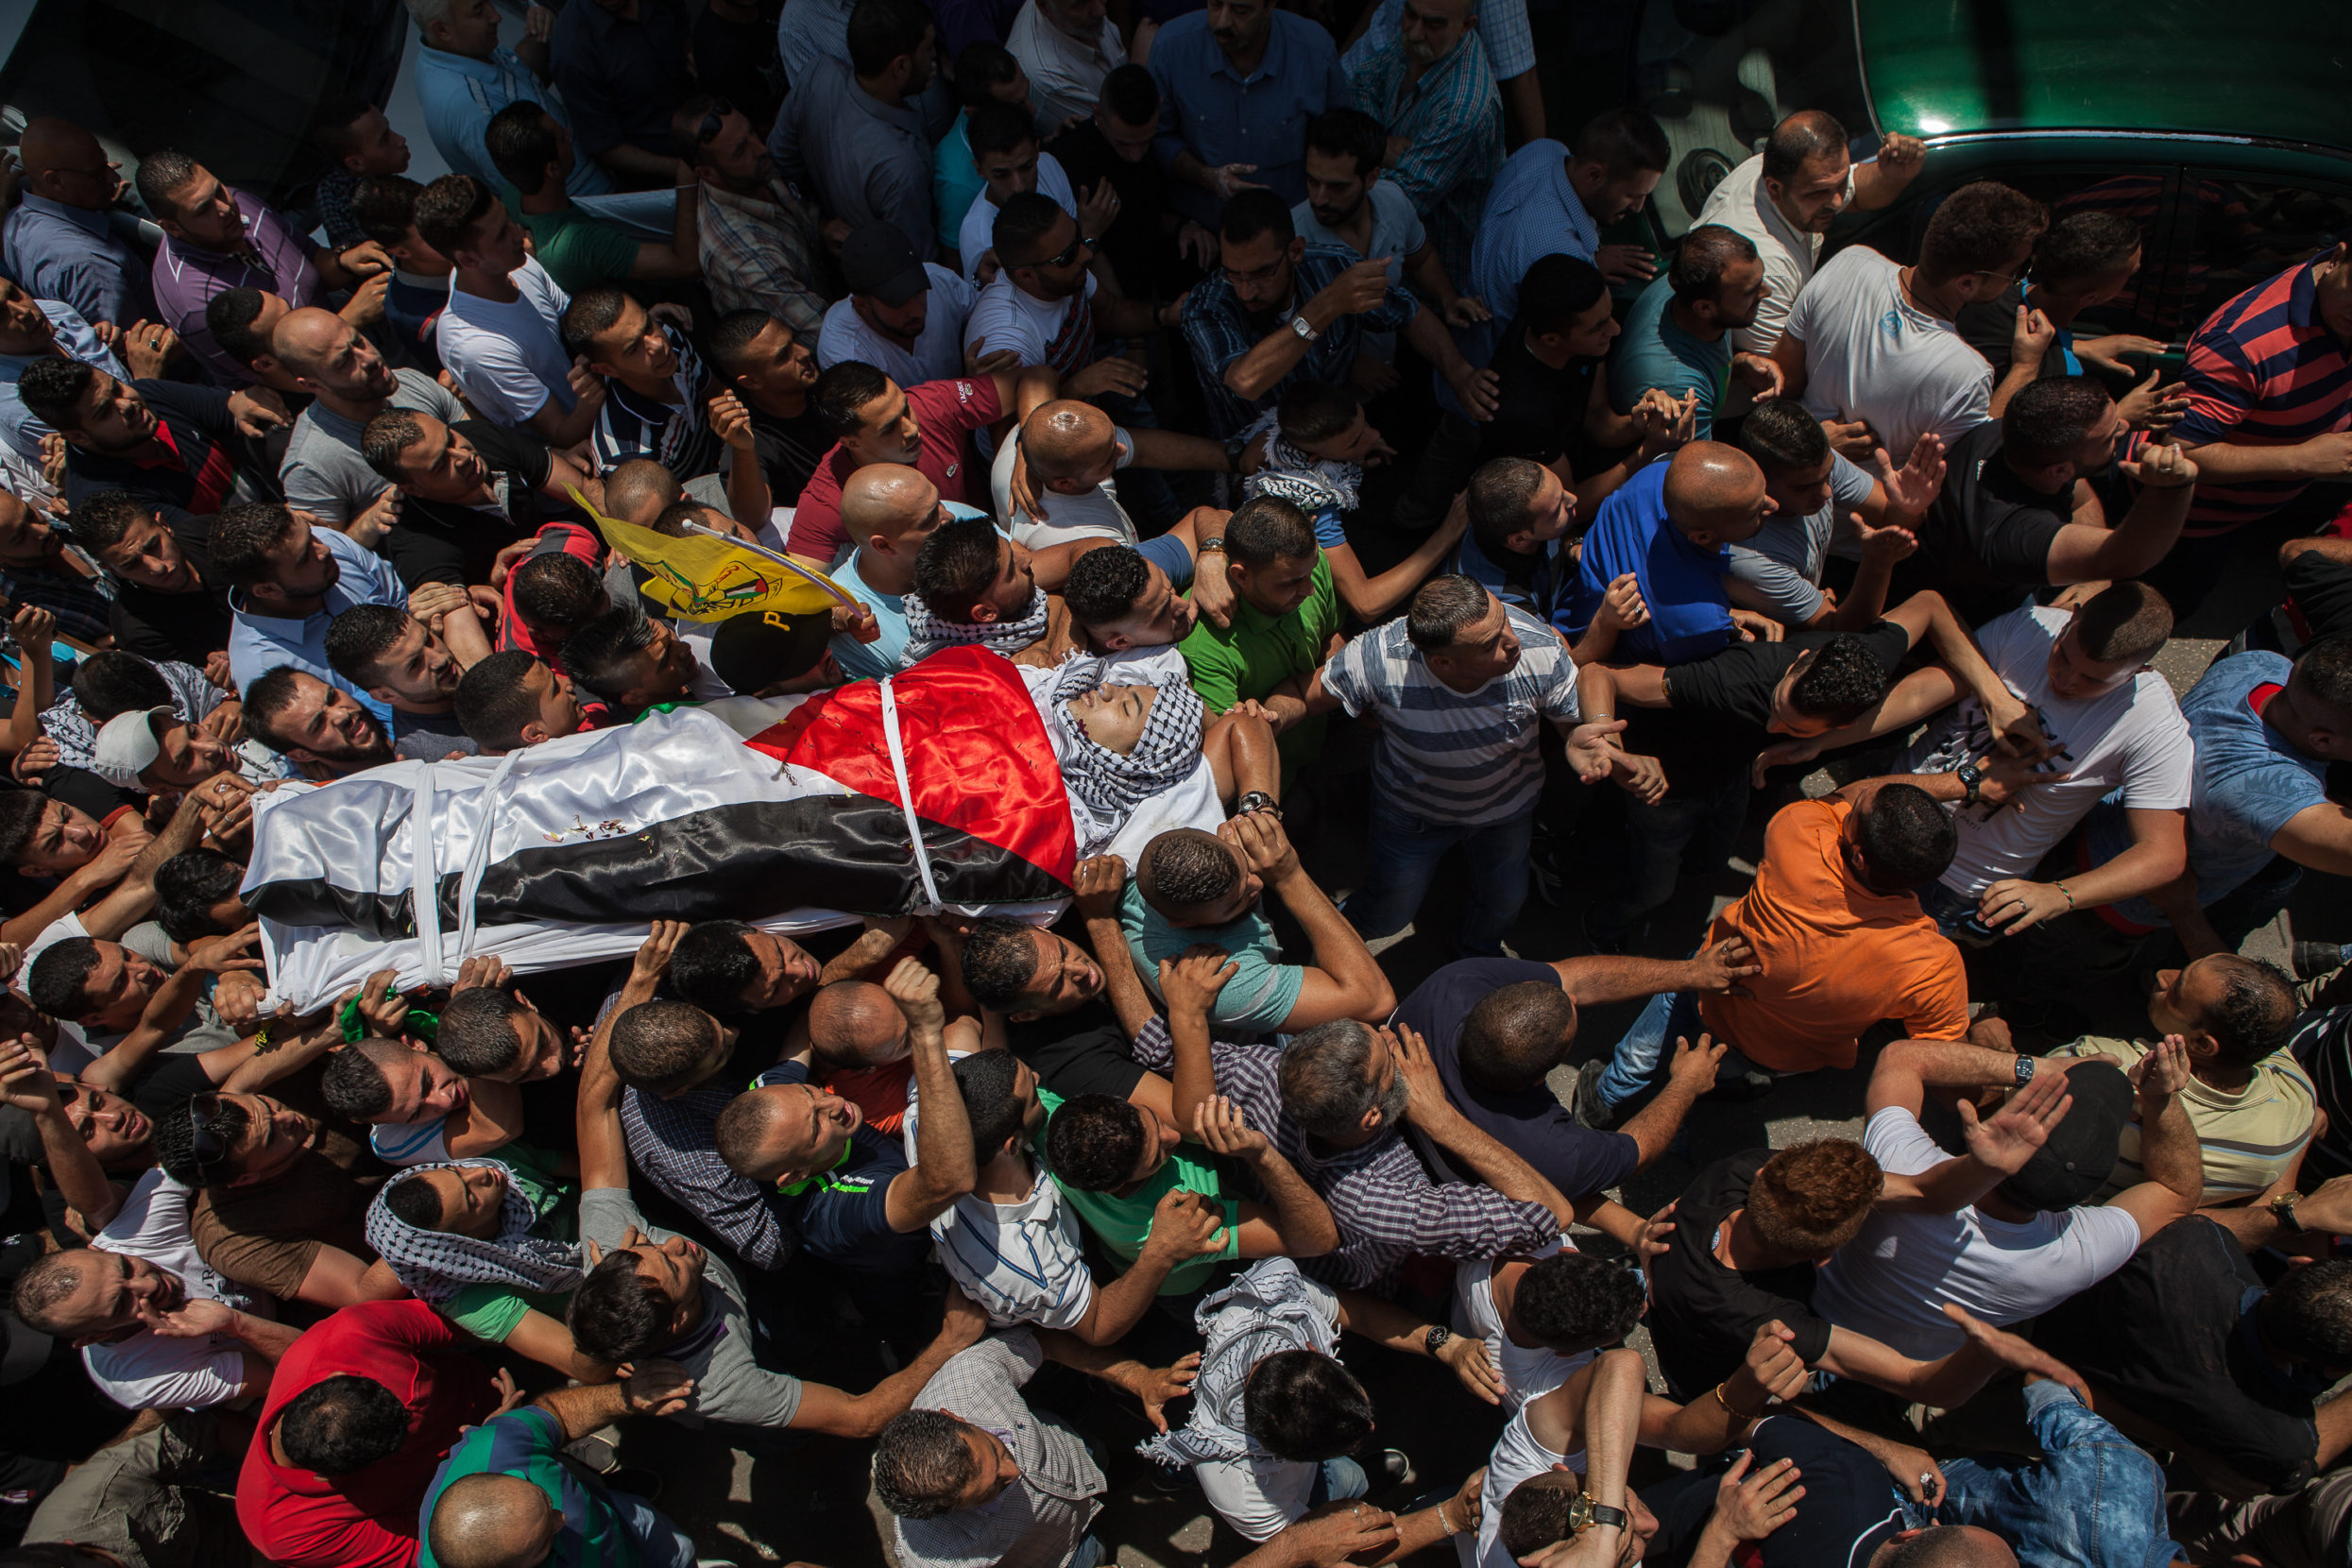 In August 2015, van Rijn found herself covering back-to-back tragedies: the death of an infant when Israeli settlers started a fire in his home and the subsequent death of a 17-year-old shot at a refugee camp while protesting the first child’s death. Here, the body of the latter is wrapped in a Palestinian flag as a funeral procession carries him. Photo: Edmée van Rijn.